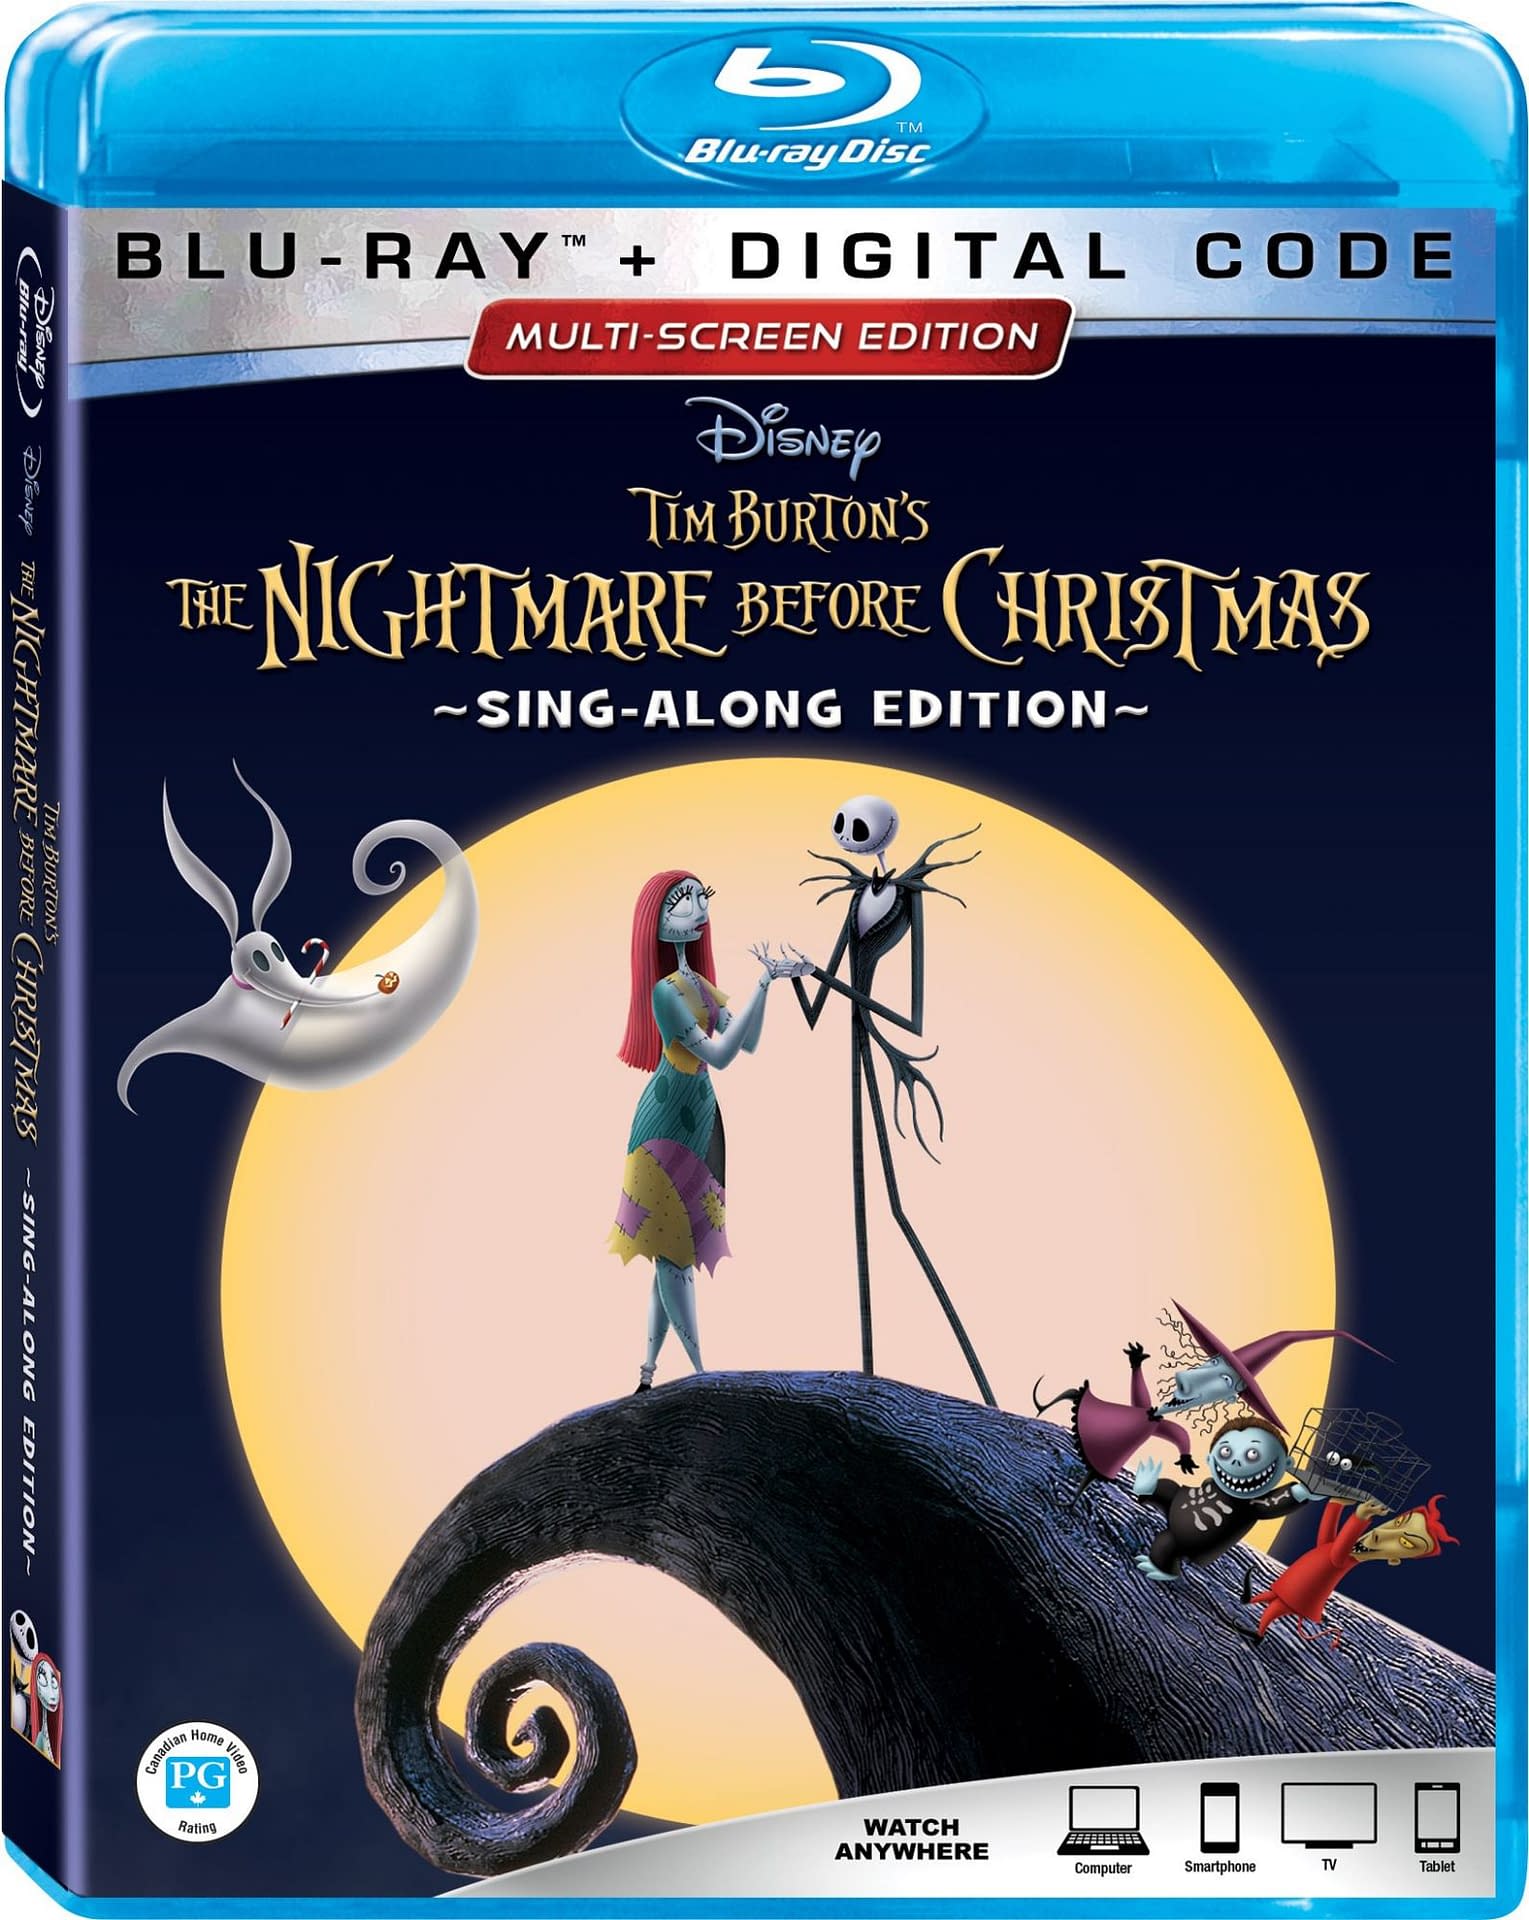 The Nightmare Before Christmas' 25th Anniversary Blu-ray Details Revealed